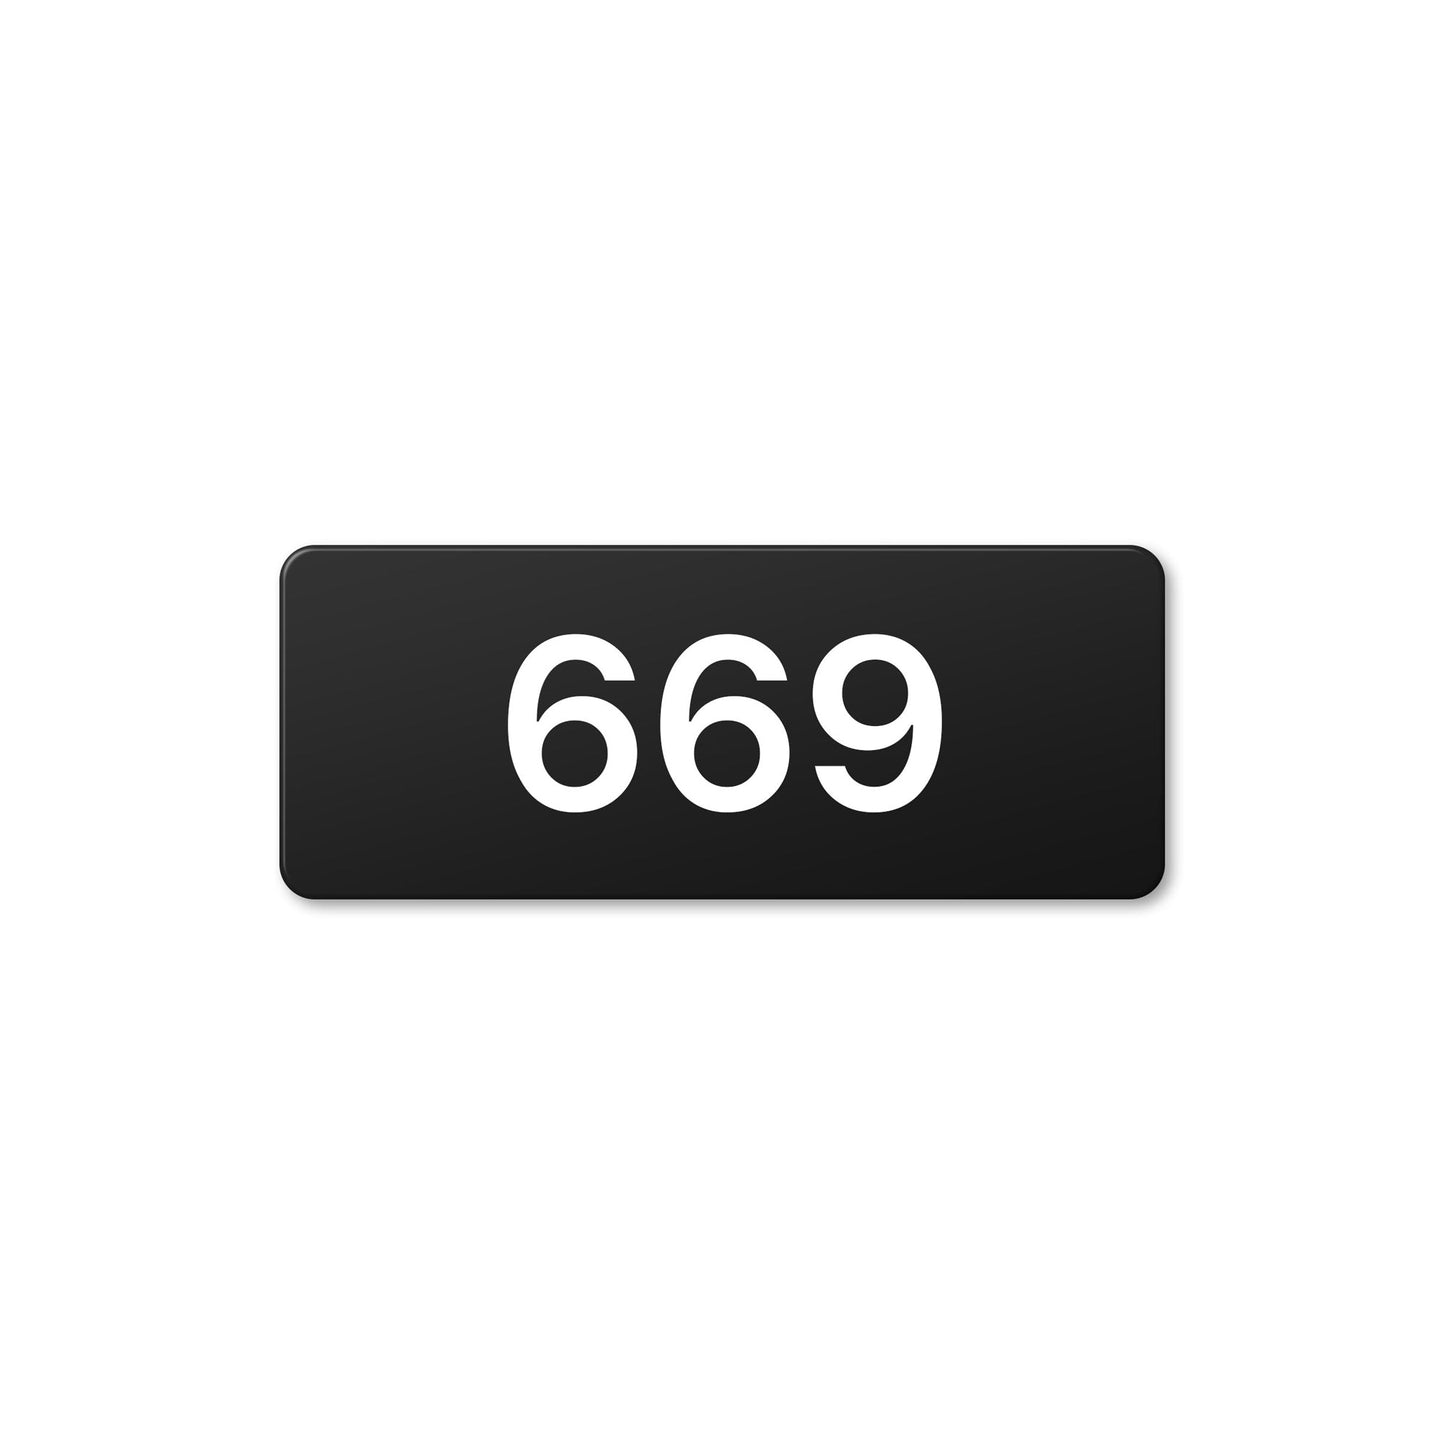 Numeral 669